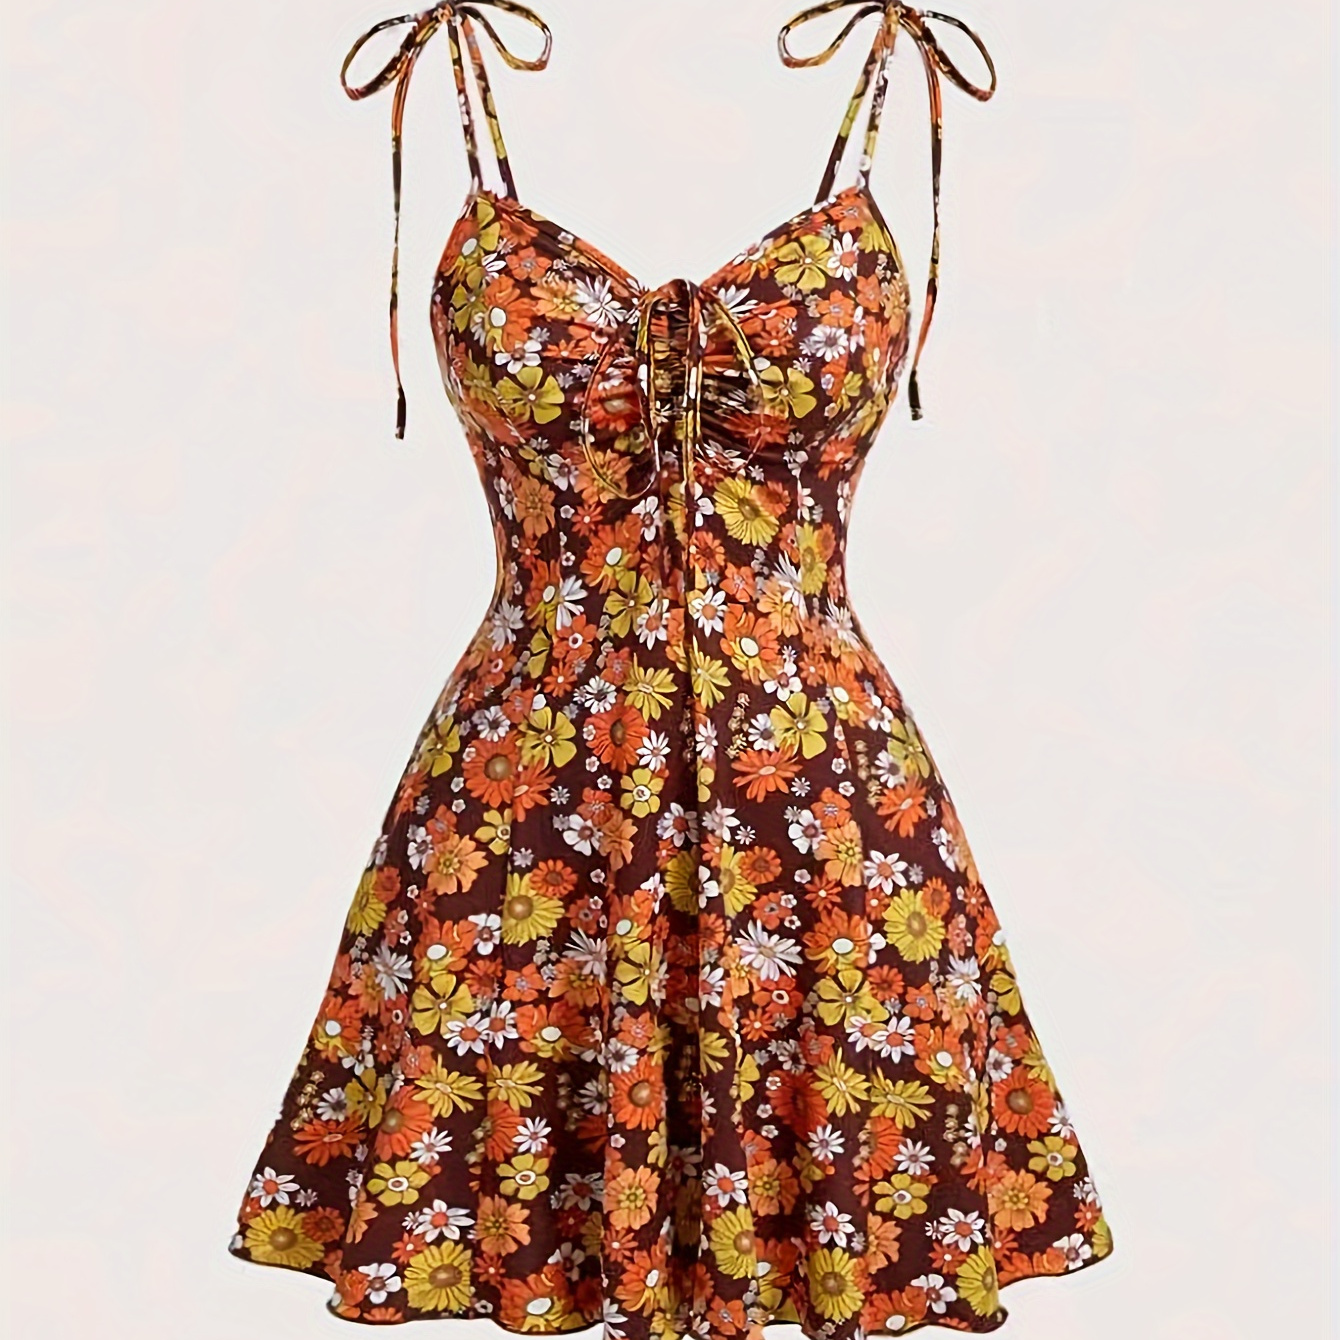 

Floral Print Spaghetti Strap Dress, Vacation Style Tie Shoulder Dress For Spring & Summer, Women's Clothing